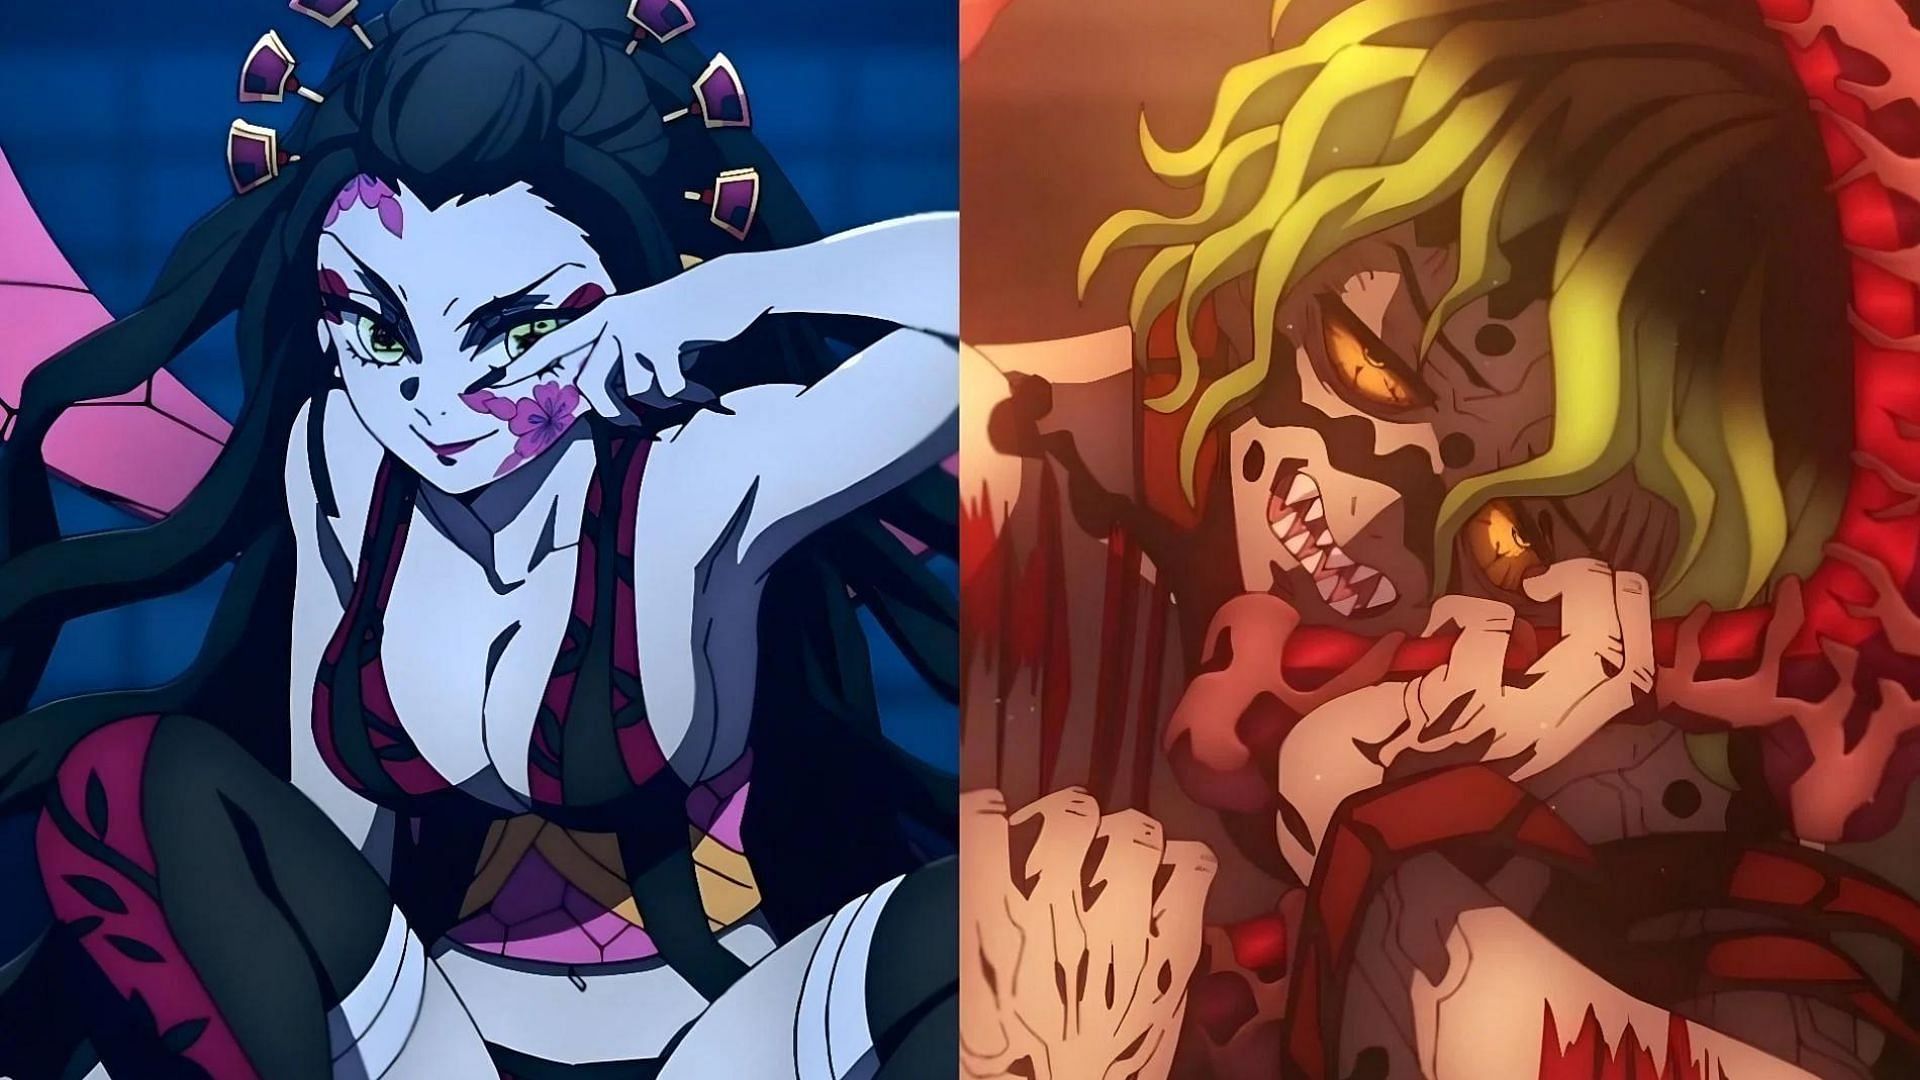 What is the backstory of Daki and Gyutaro in Demon Slayer?